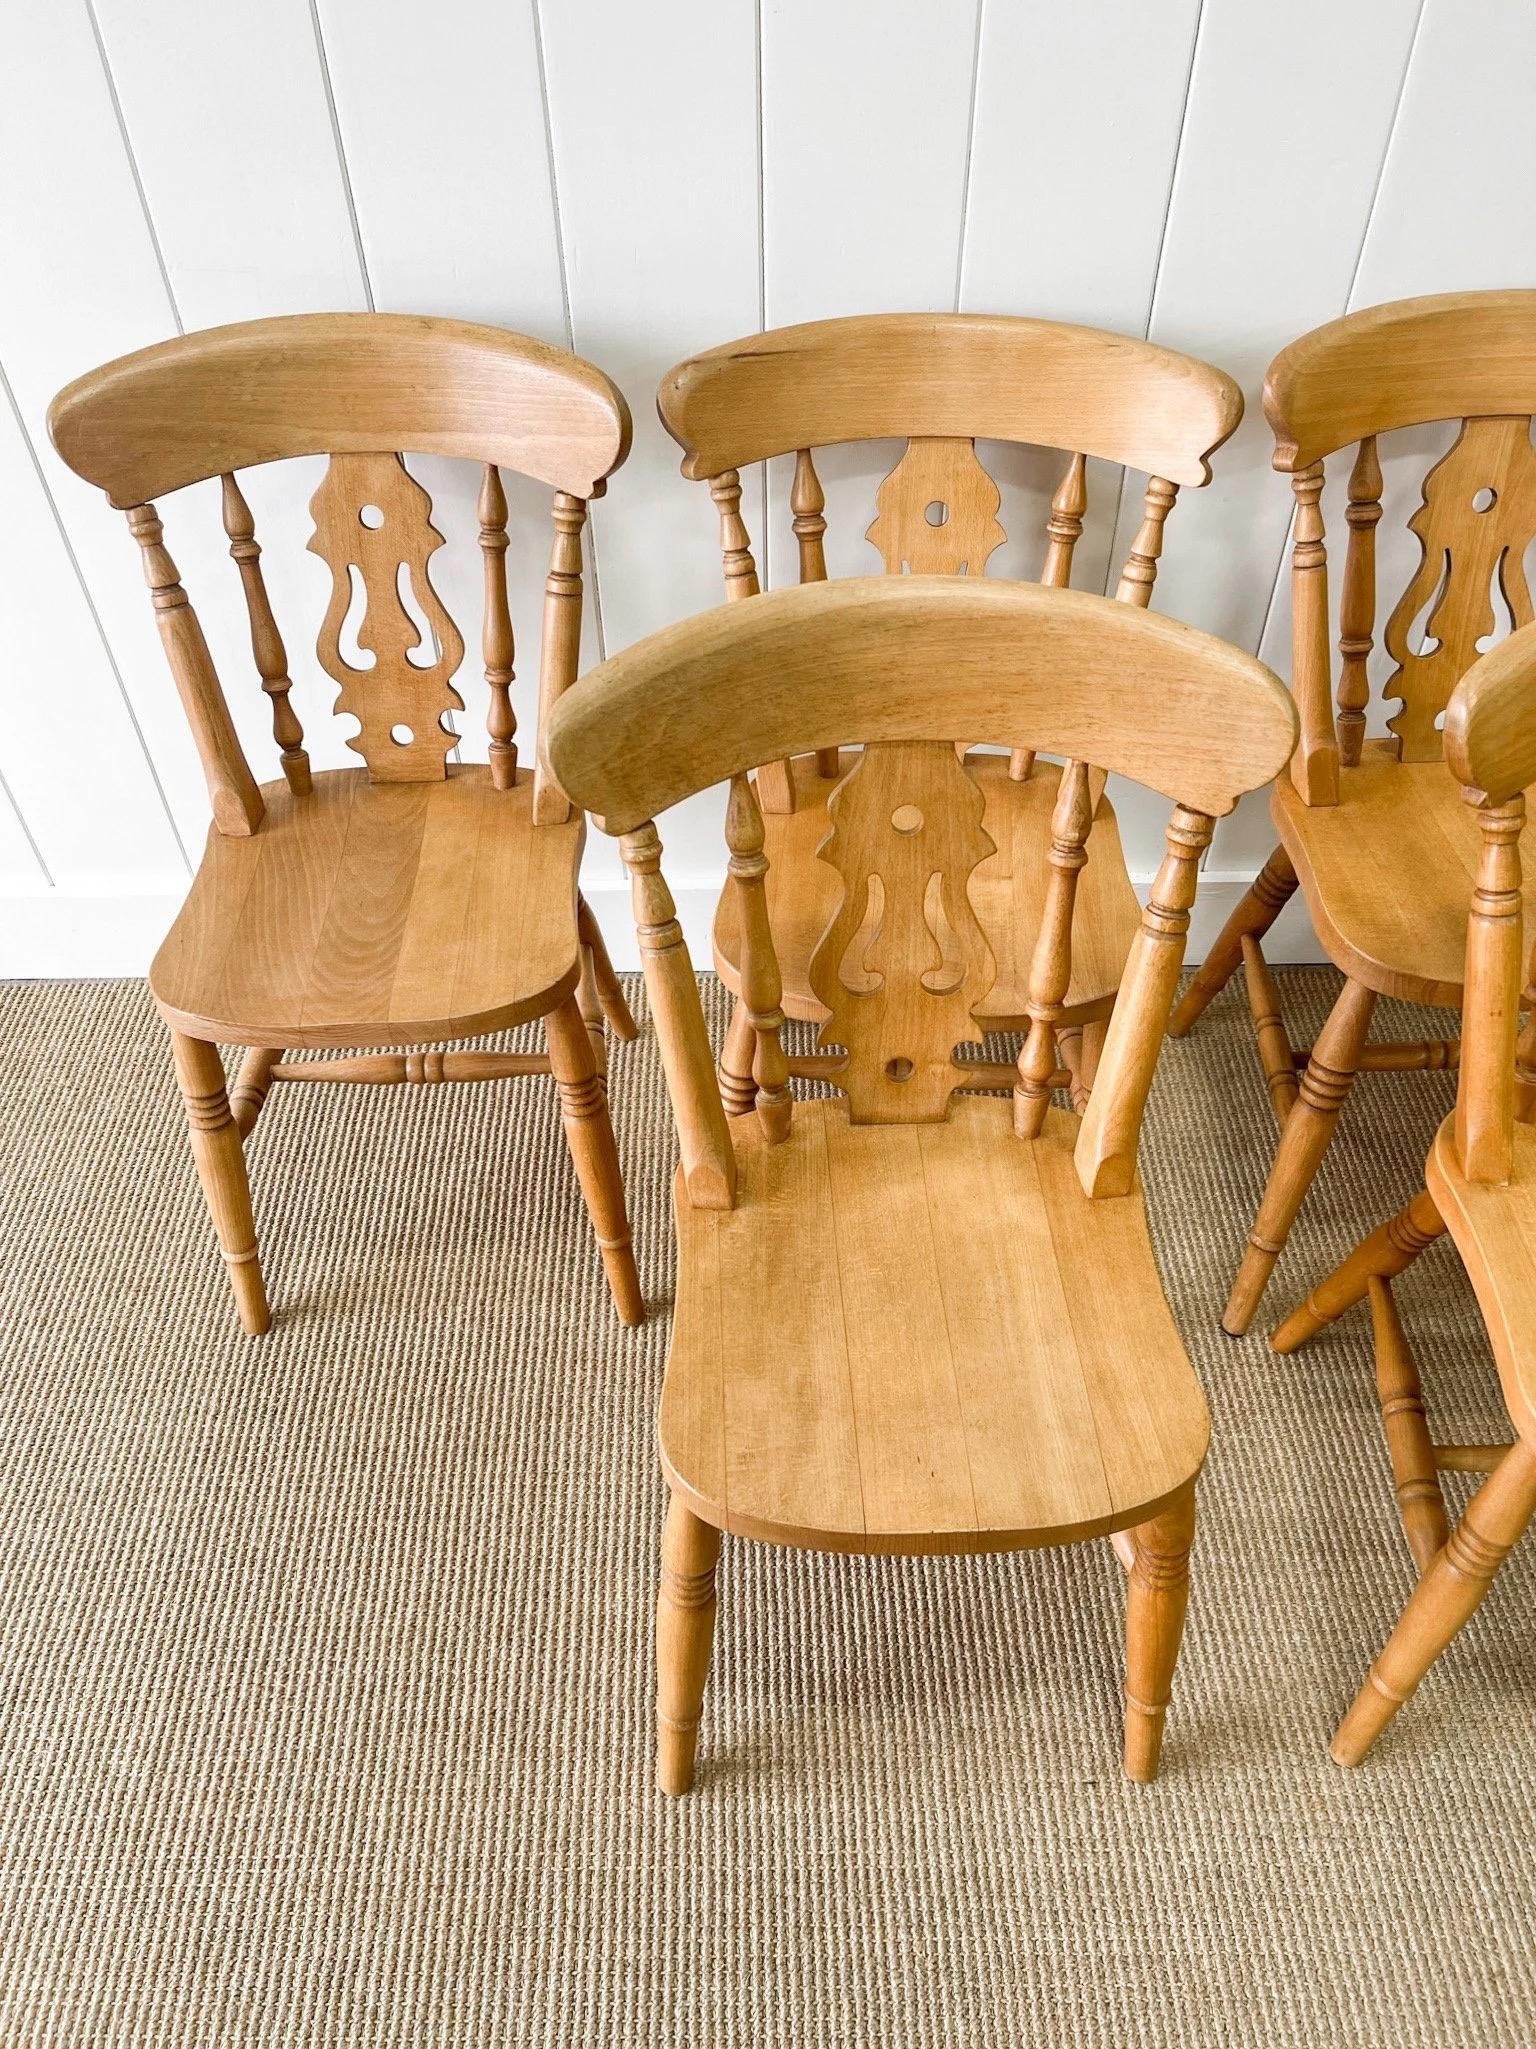 A good set of 6 vintage fiddle back side chairs. Very solidly built in the traditional way.  Handsome profiles and good and heavy. Perfect around a farmhouse table! Solid in joint. These are not antiques.

Condition: scratches, dents, marks, some